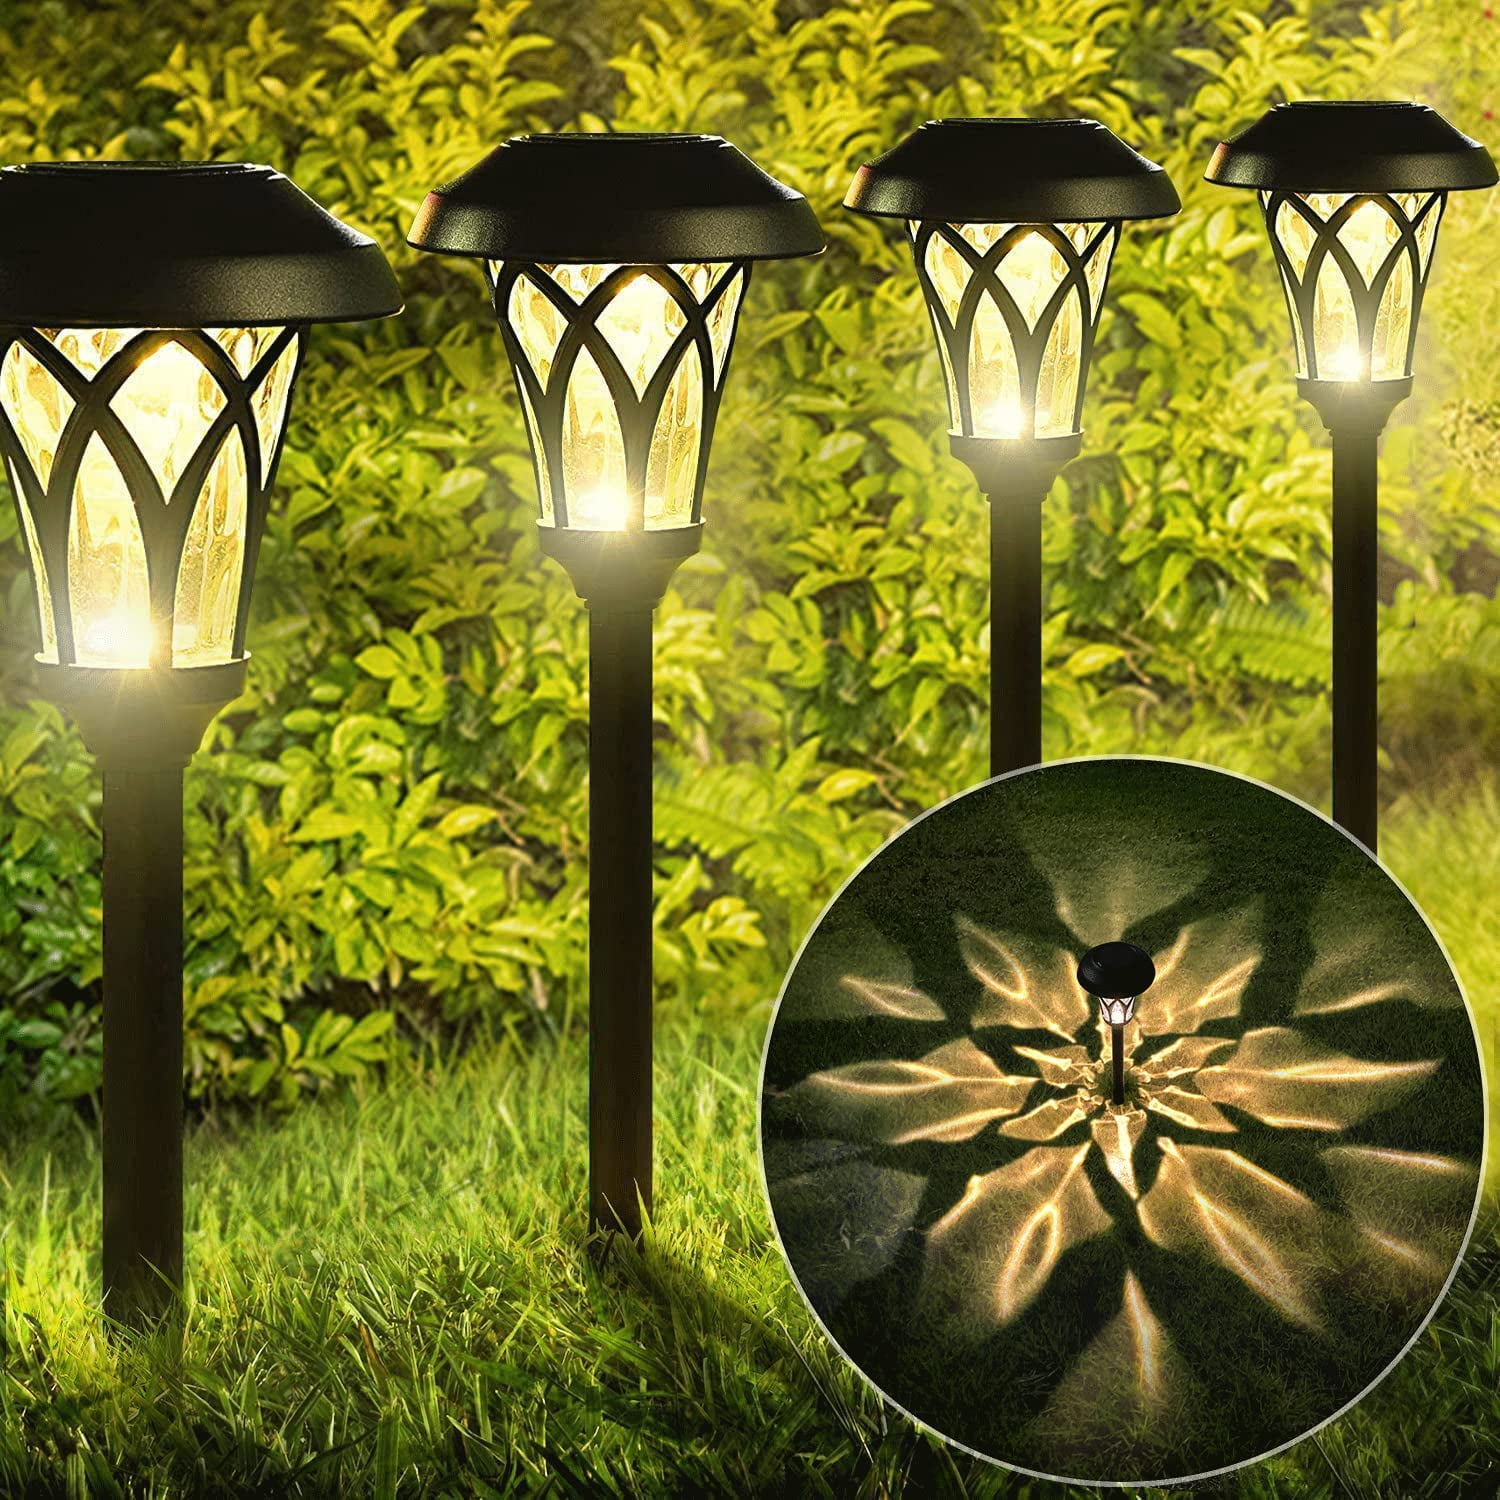 BEAU JARDIN Pack Solar Lights Pathway Outdoor Waterproof Supper Bright Up to 12 Hrs Glass Stainless Steel Metal Auto On Off Solar Powered Landscape - 4